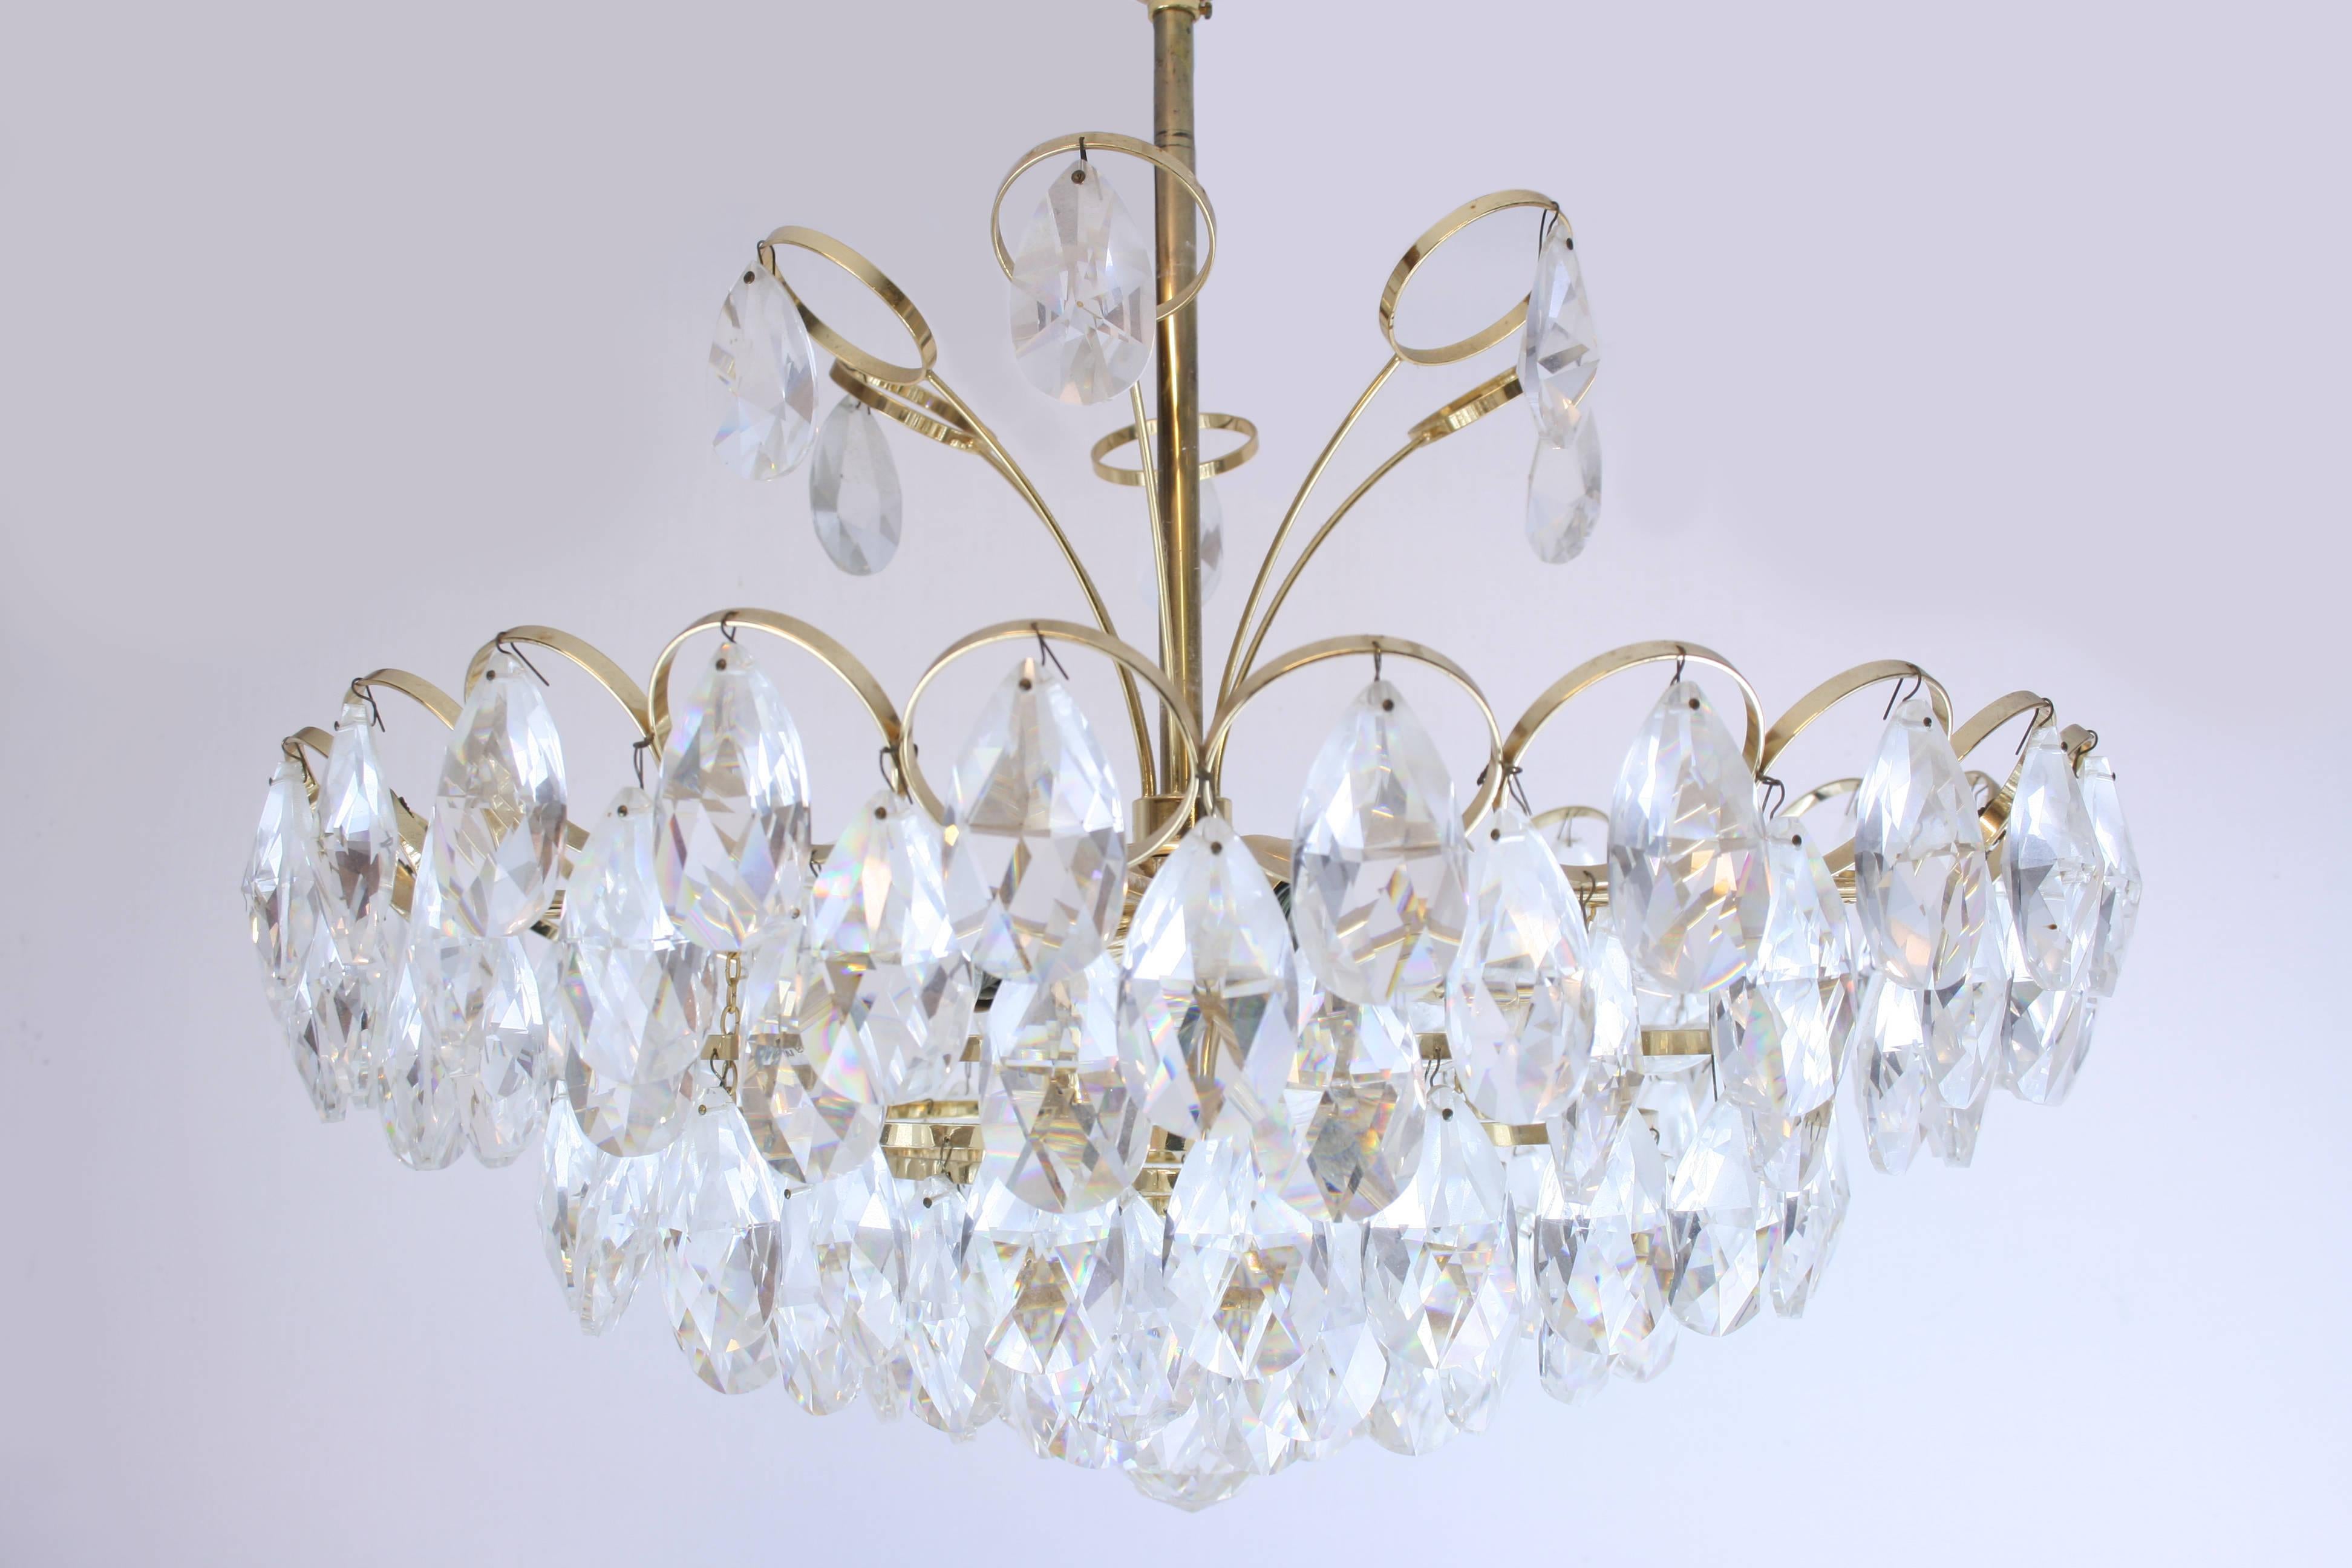 20th century gilded crystal brass chandelier by the German manufacturer Palwa. A masterpiece of artful German craftsmanship suitable as dining room pendant, bedroom pendant and distinguished living room pendant. An effectful luster with a strong